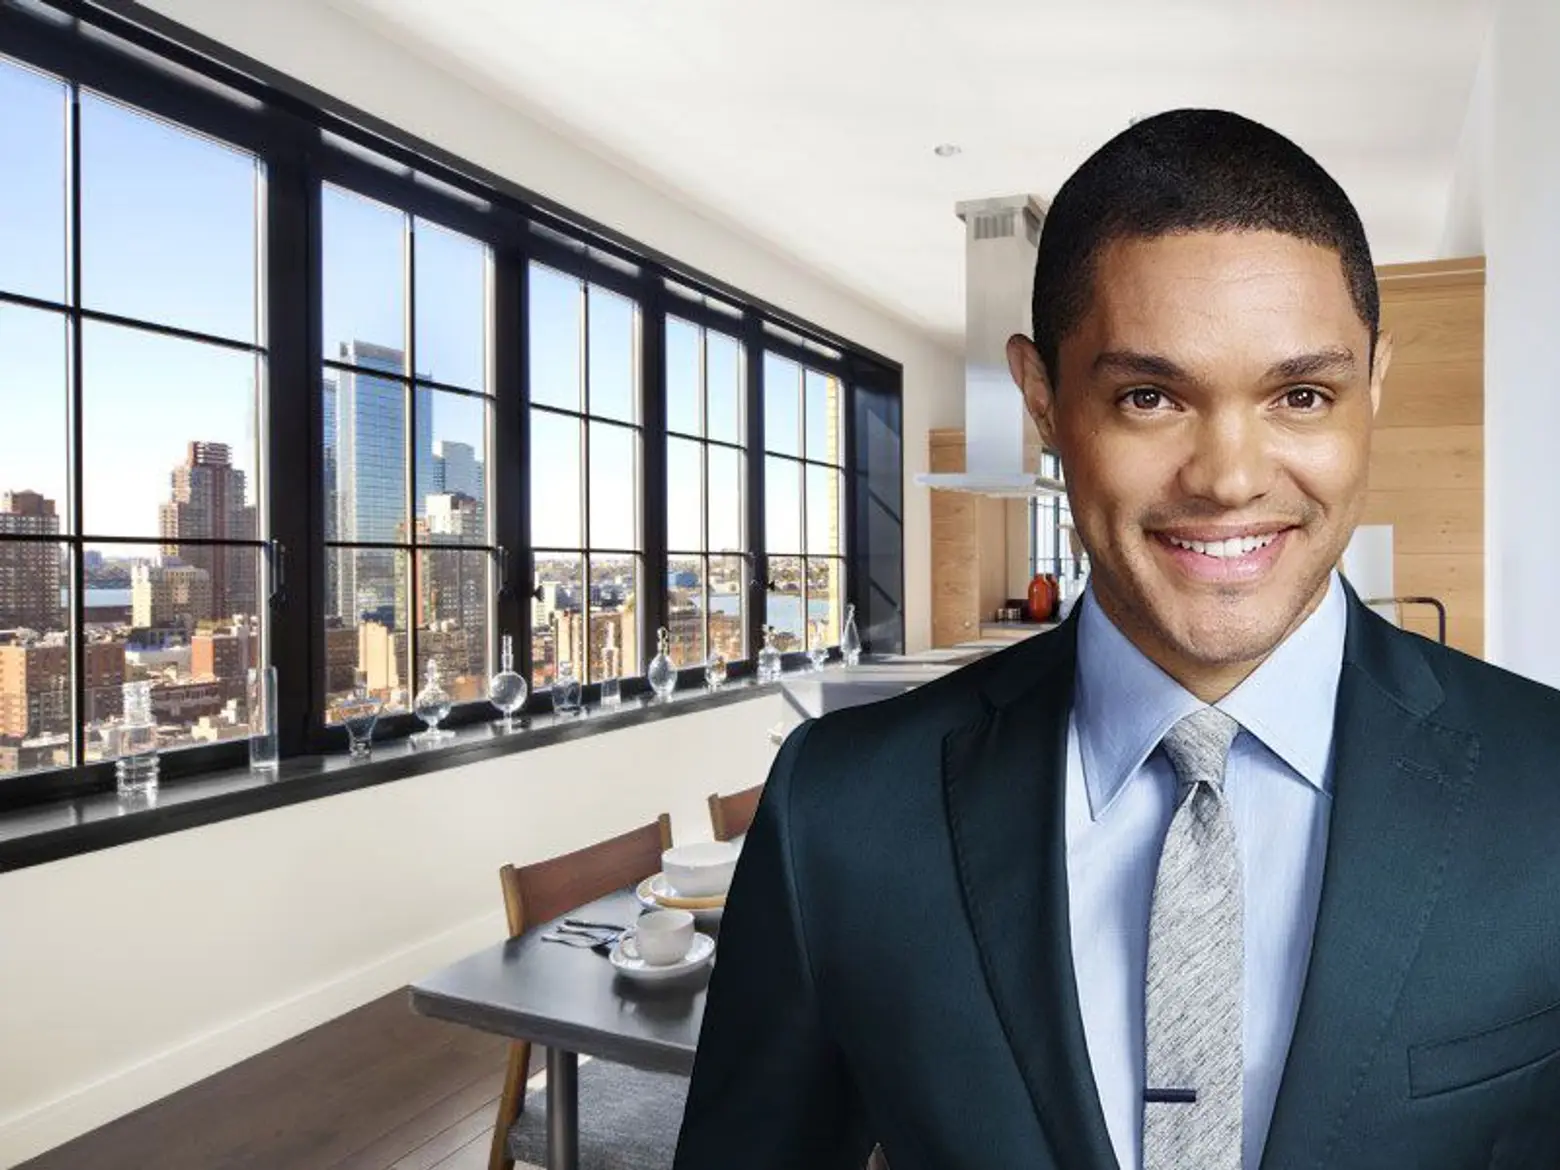 ‘The Daily Show’ host Trevor Noah buys a $10M Stella Tower penthouse